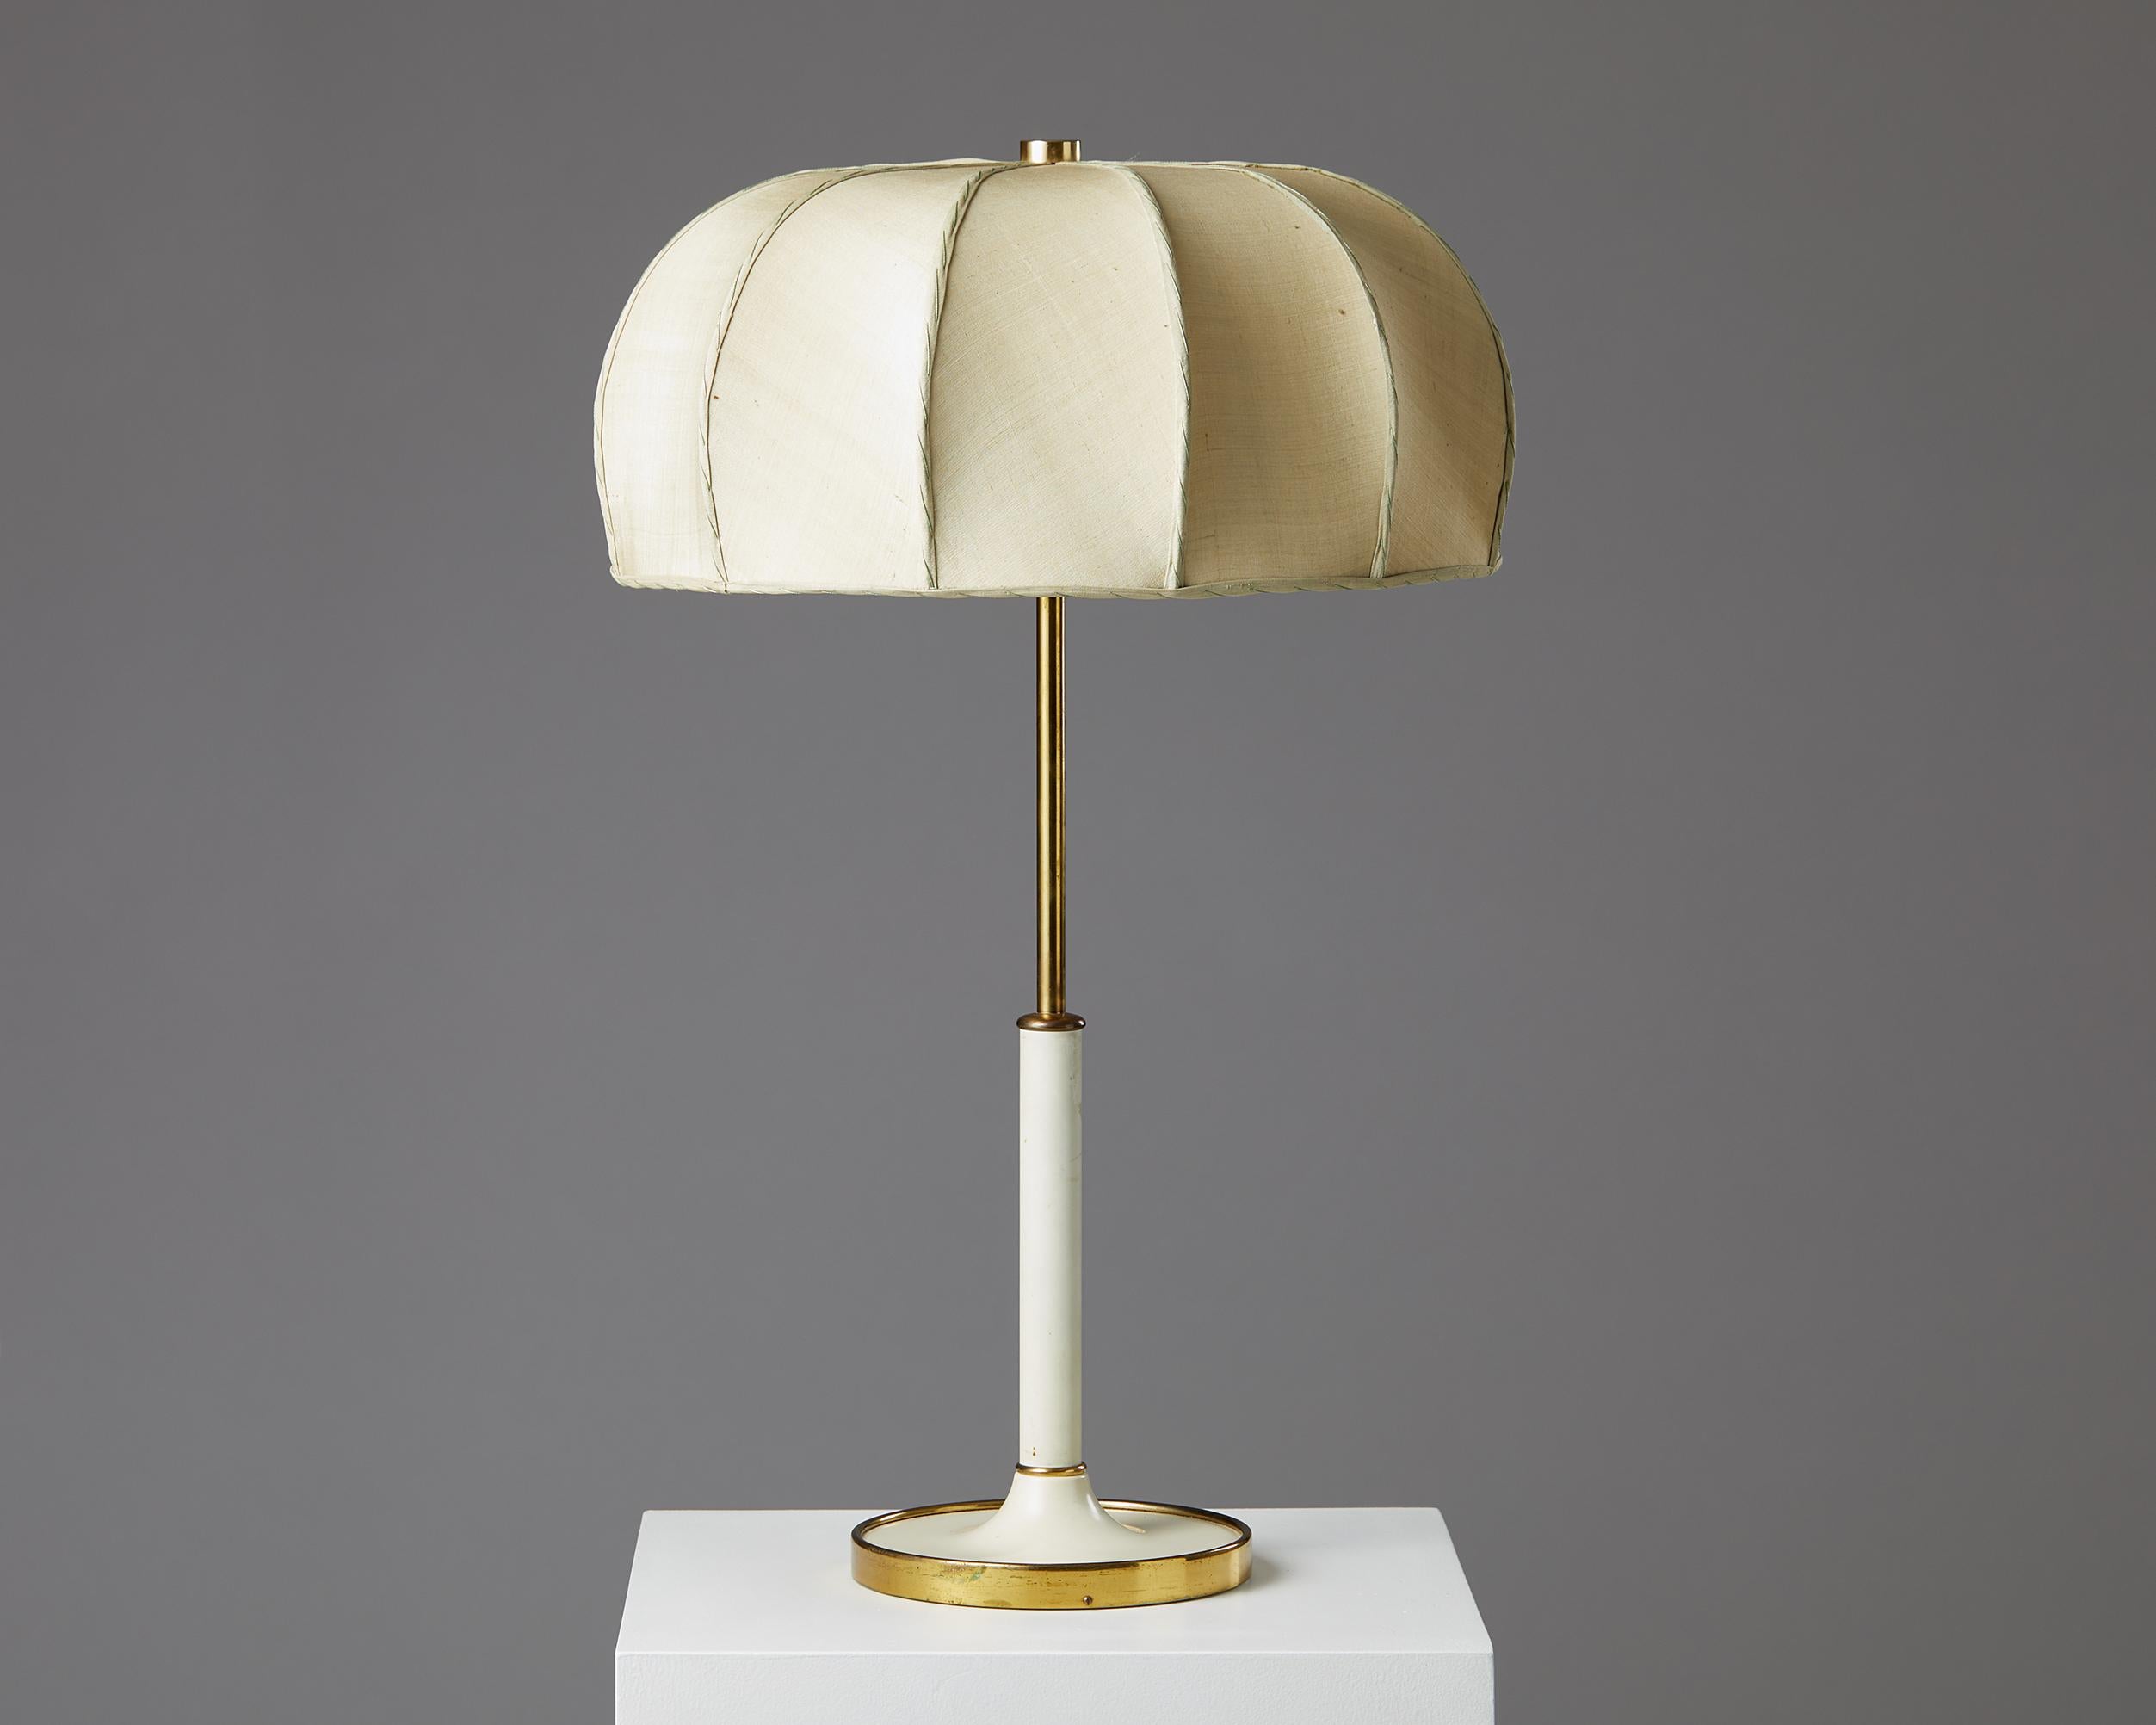 Brass and linen shade.

Measures: H 66 cm/ 26